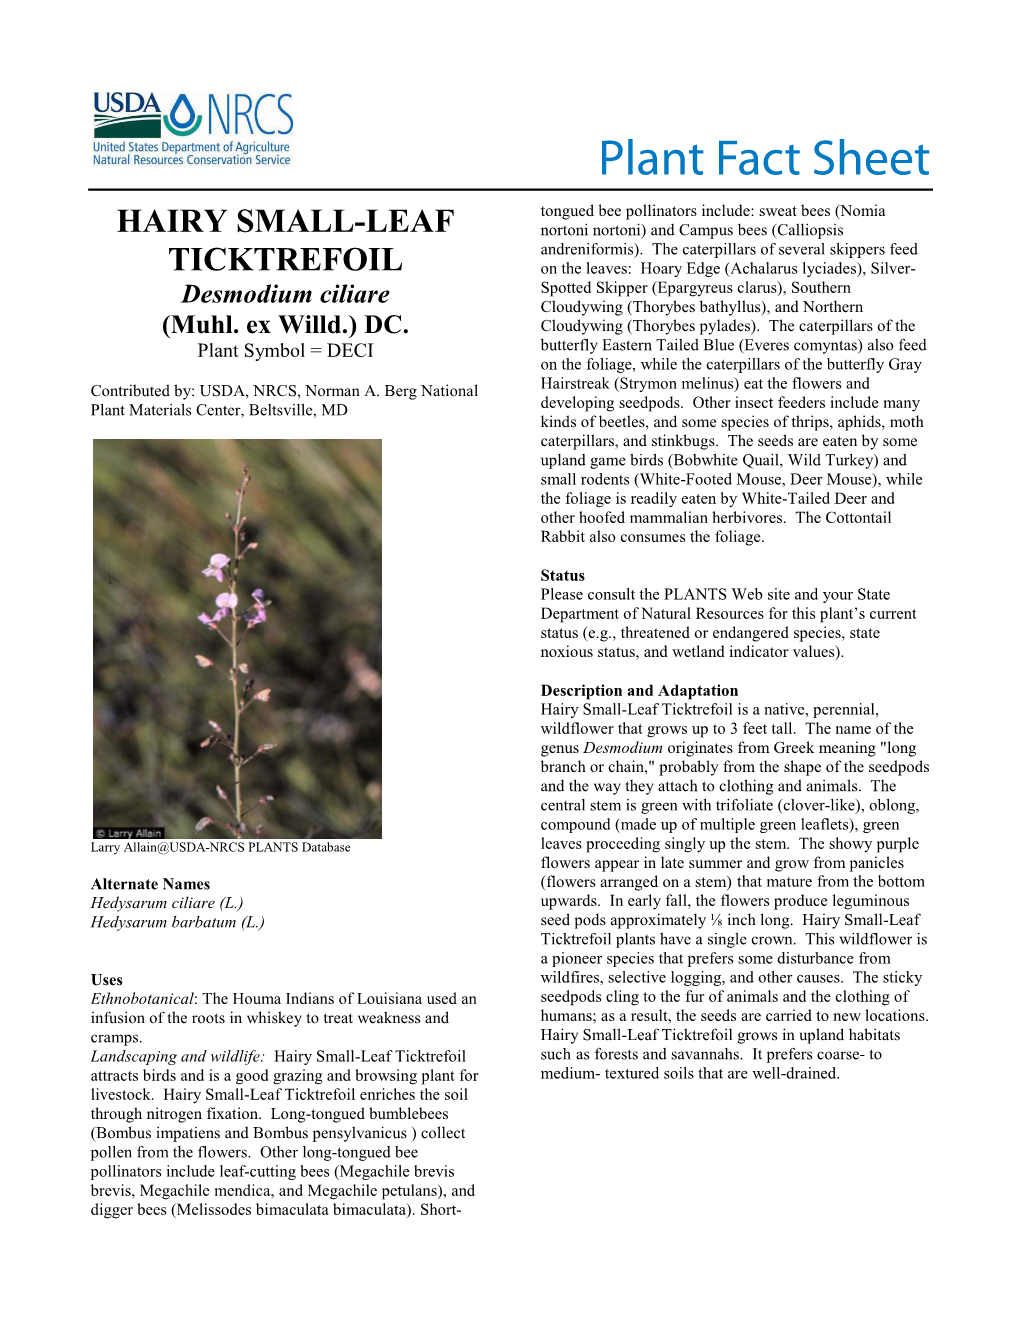 Hairy Small Leaf Ticktrefoil (Desmodium Ciliare) Plant Fact Sheet